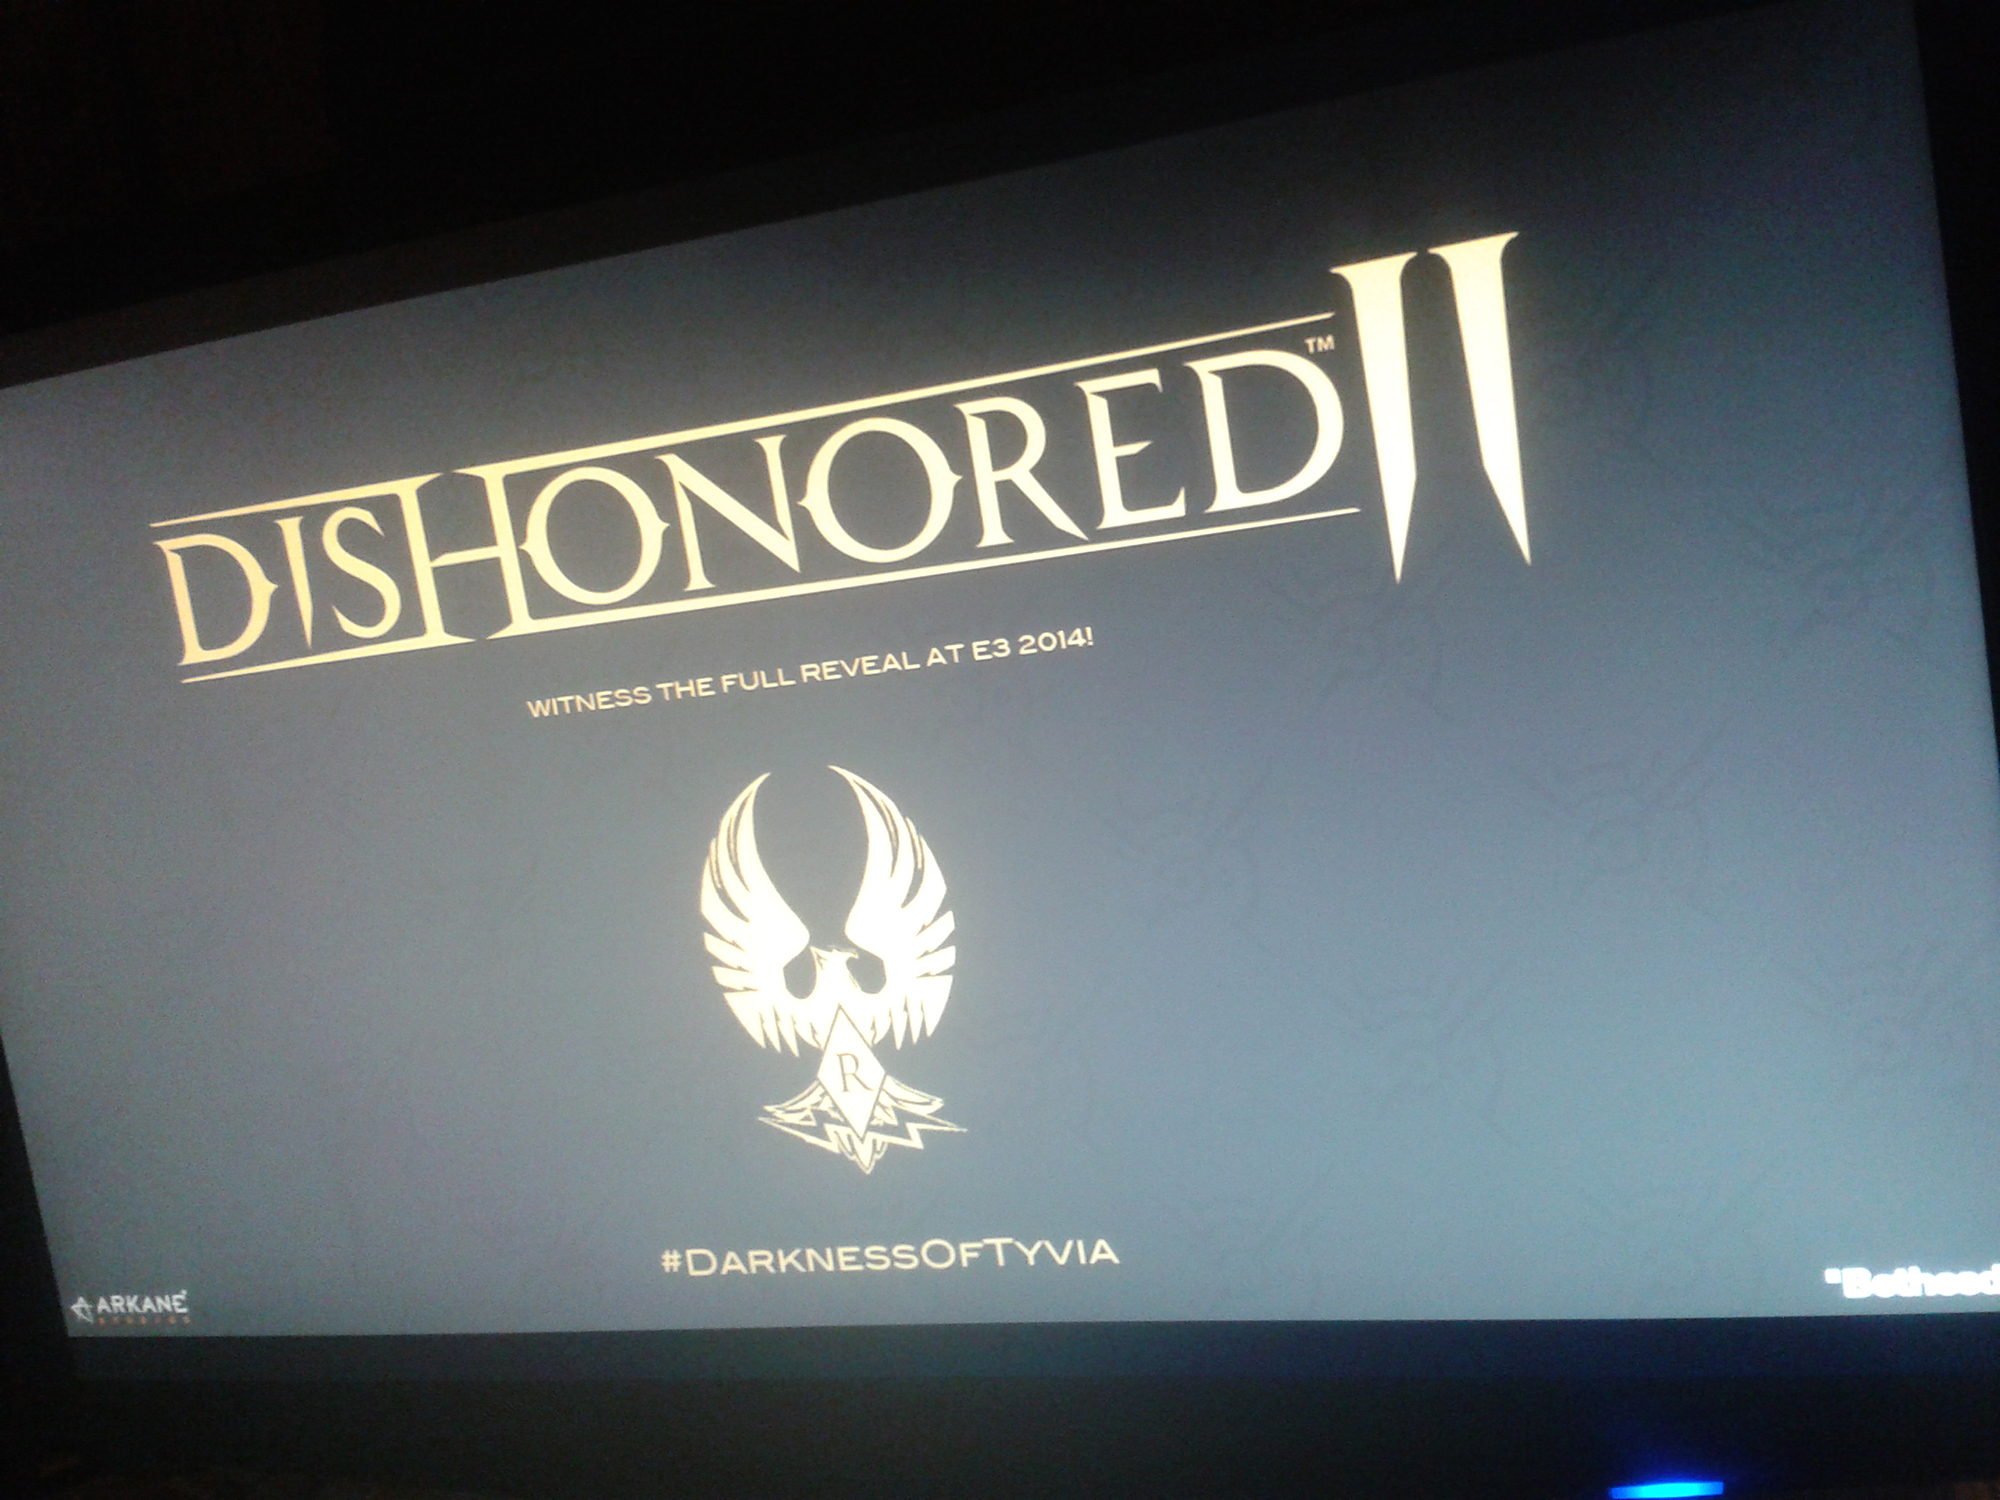 Rumor: Dishonored II: Darkness of Tyvia full reveal at E3 2014